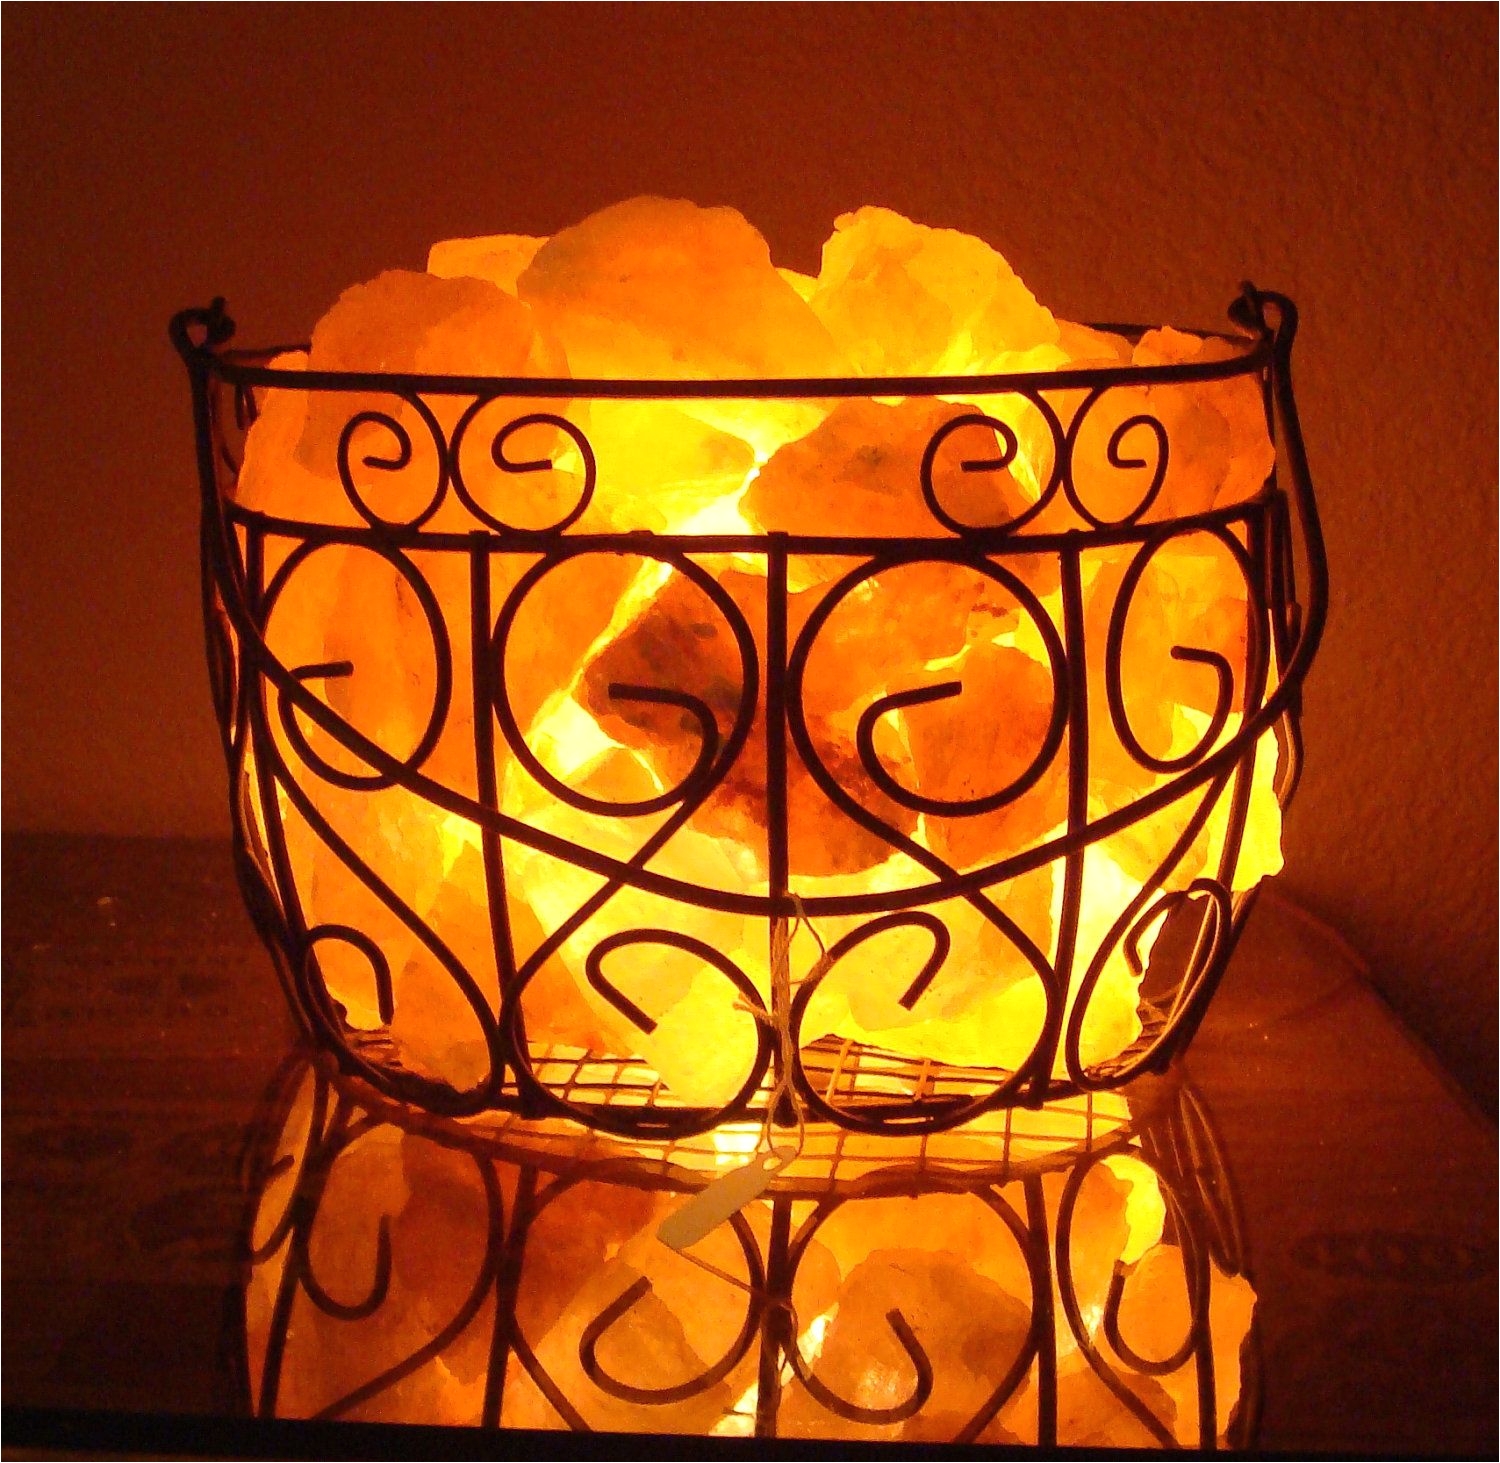 want two for the bedroom himalayan salt lamp 45 00 via etsy